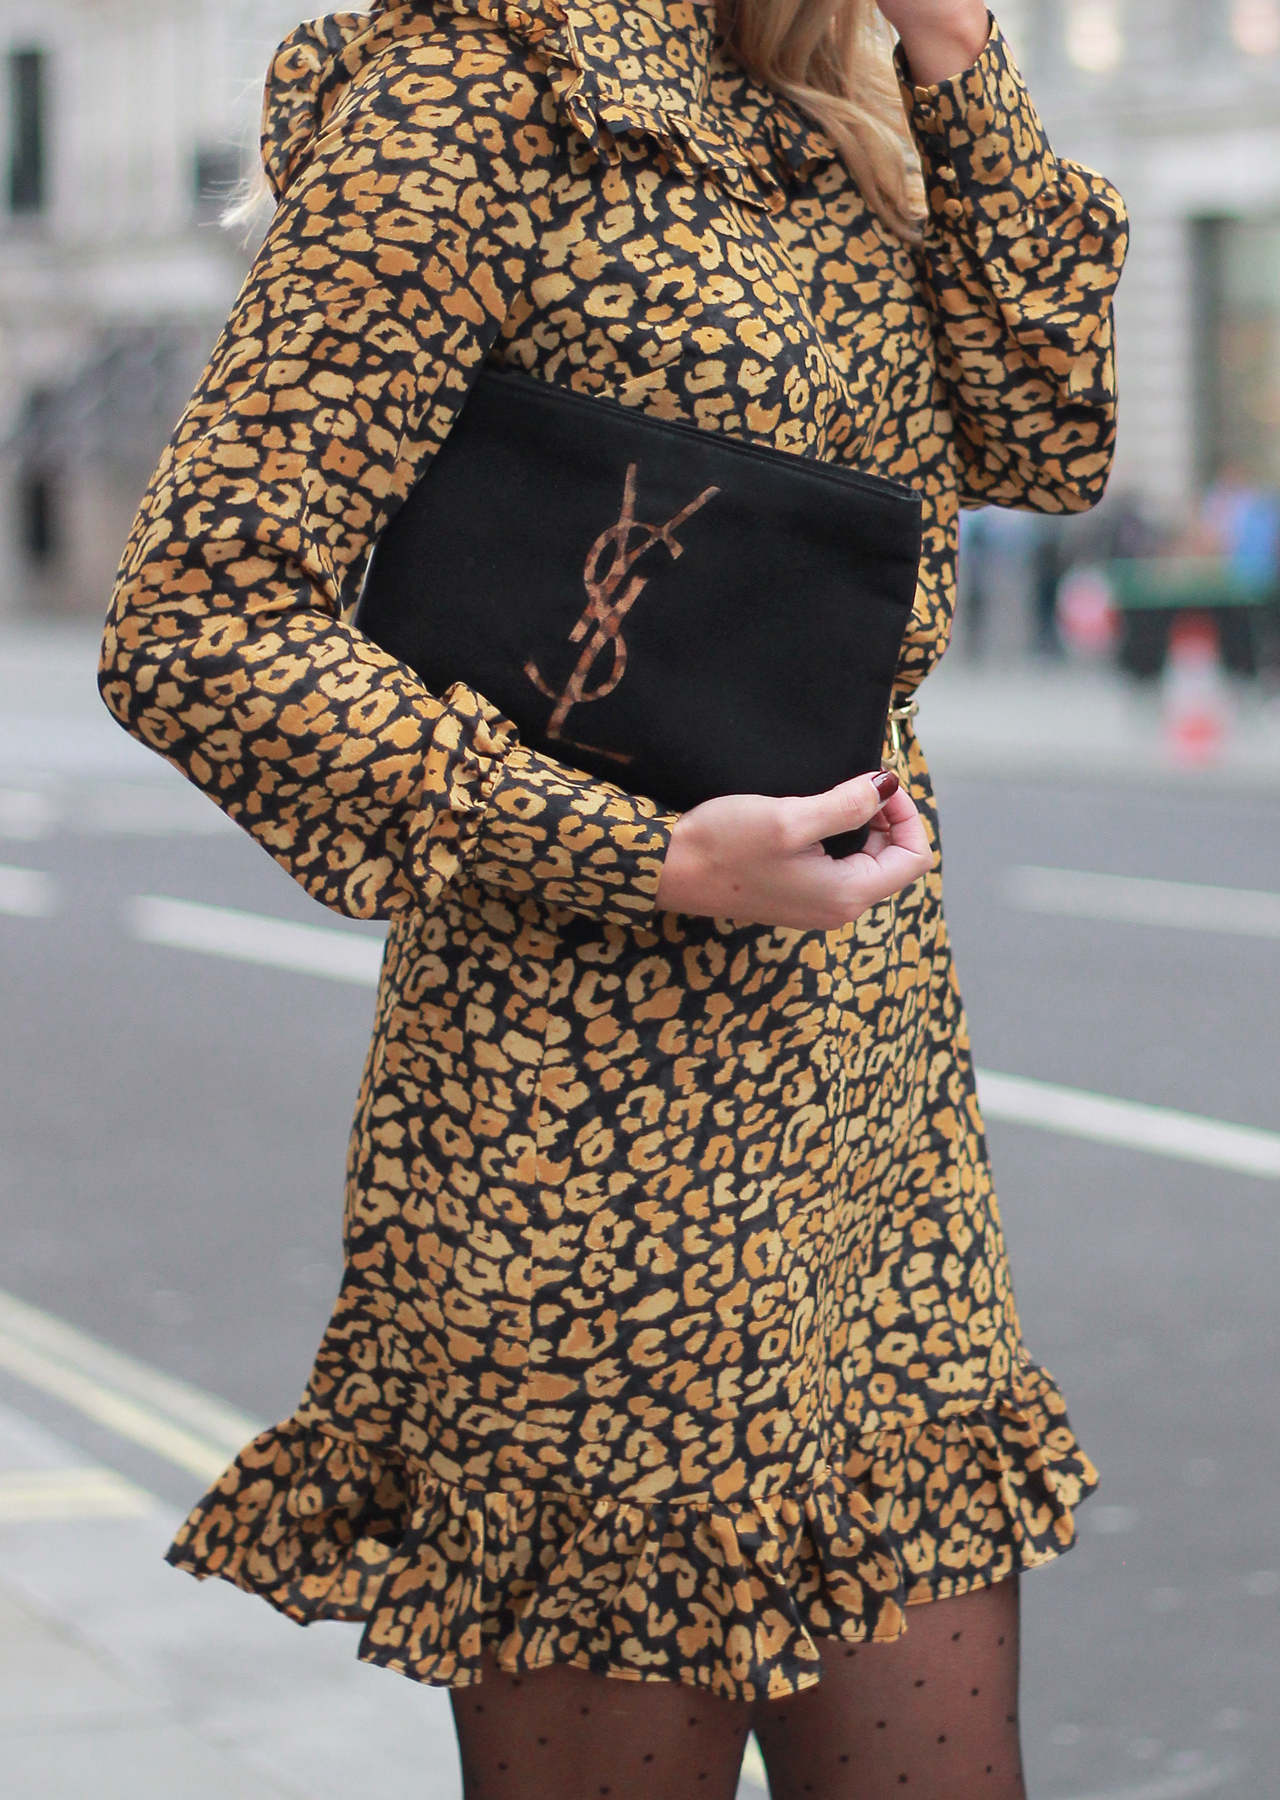 The Steele Maiden: London Night Out Style - Leopard Ruffle Dress, Fisherman's Cap and Patent Booties